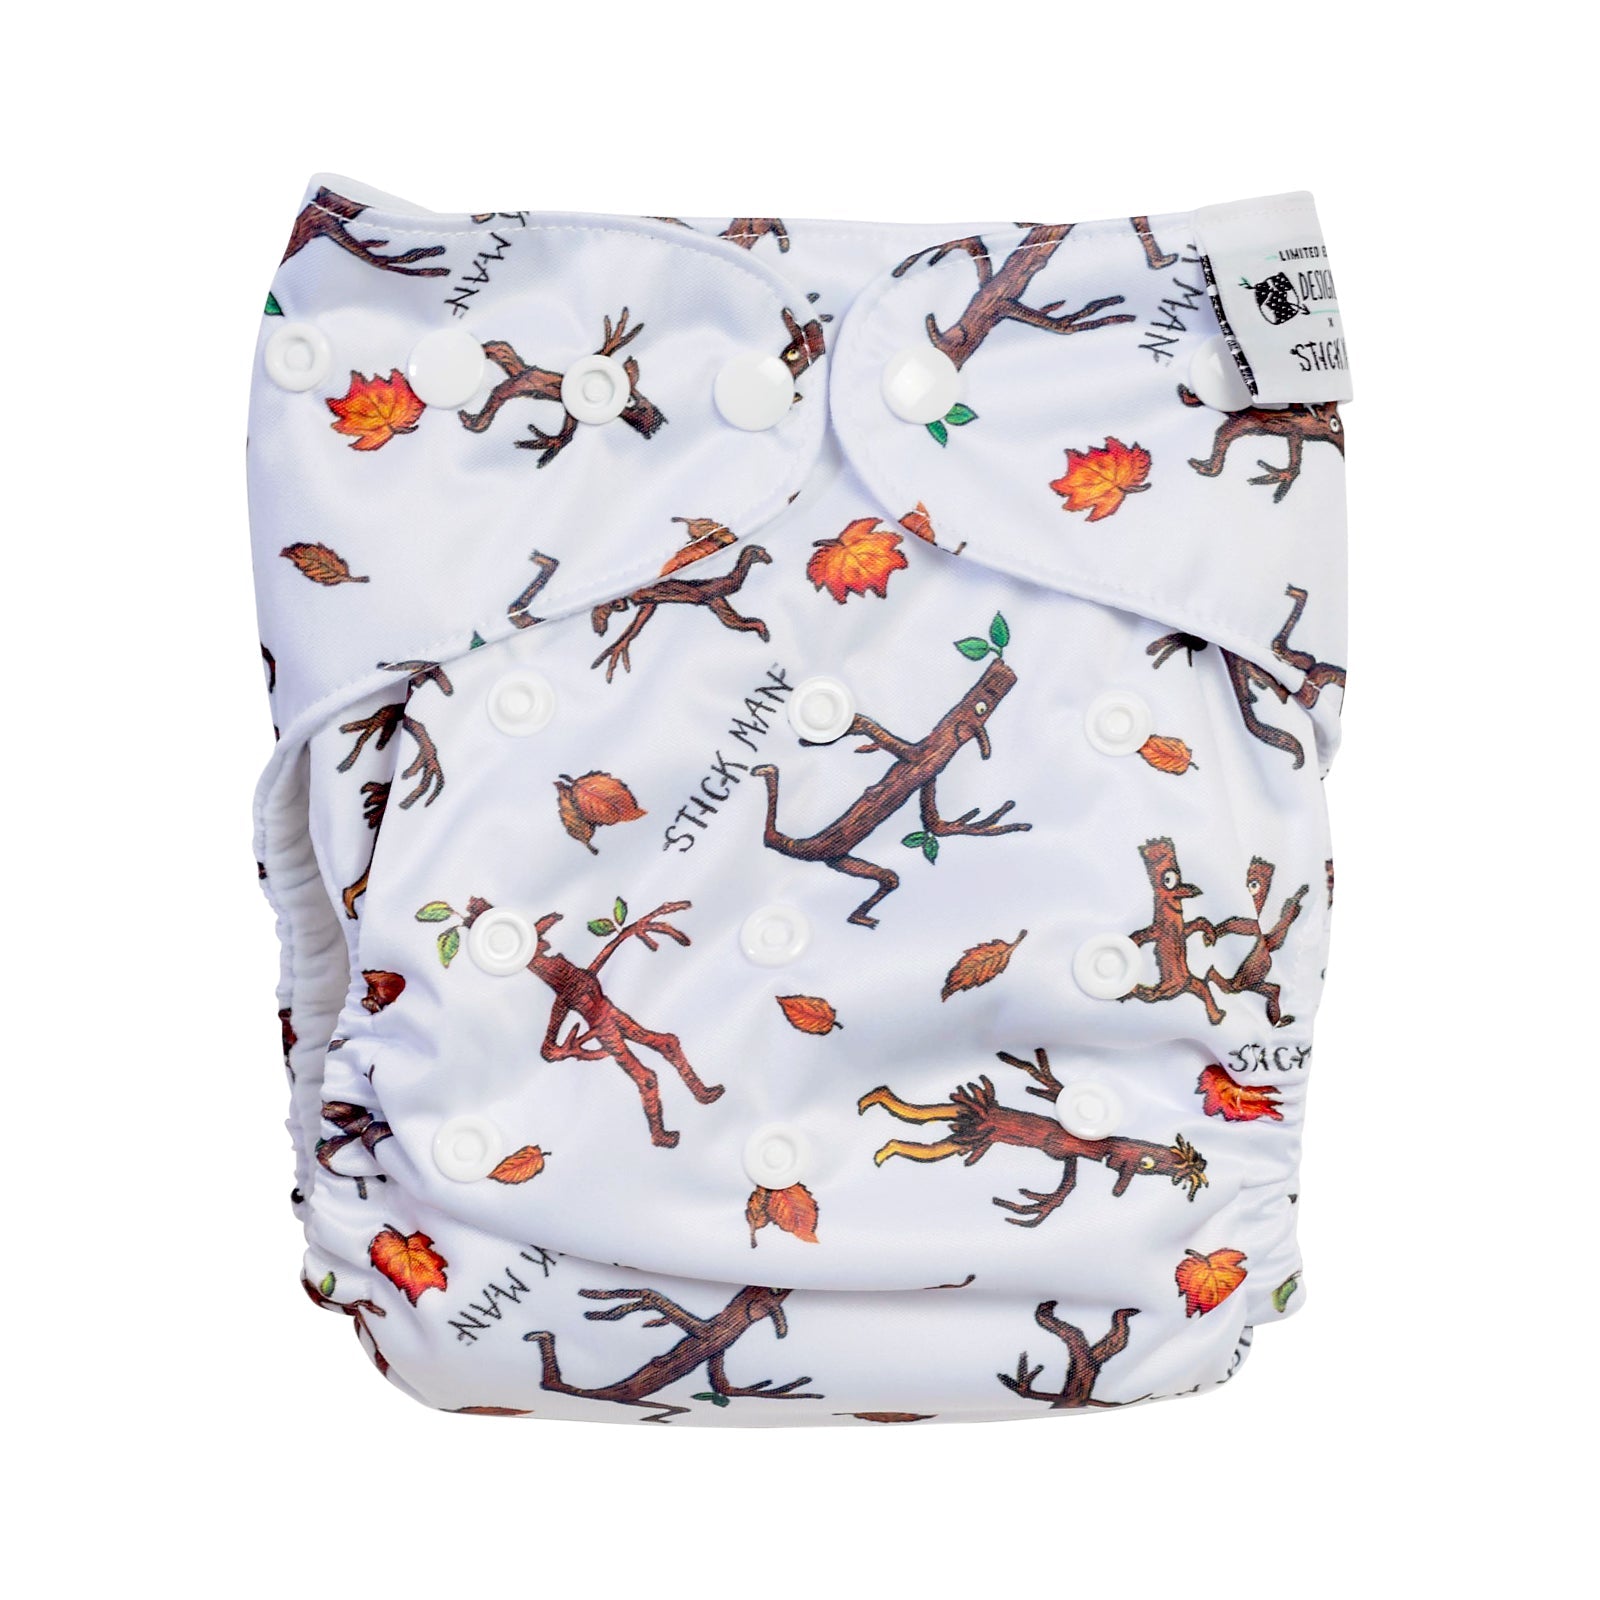 Stick Man And Stick Family Large Cloth Nappy